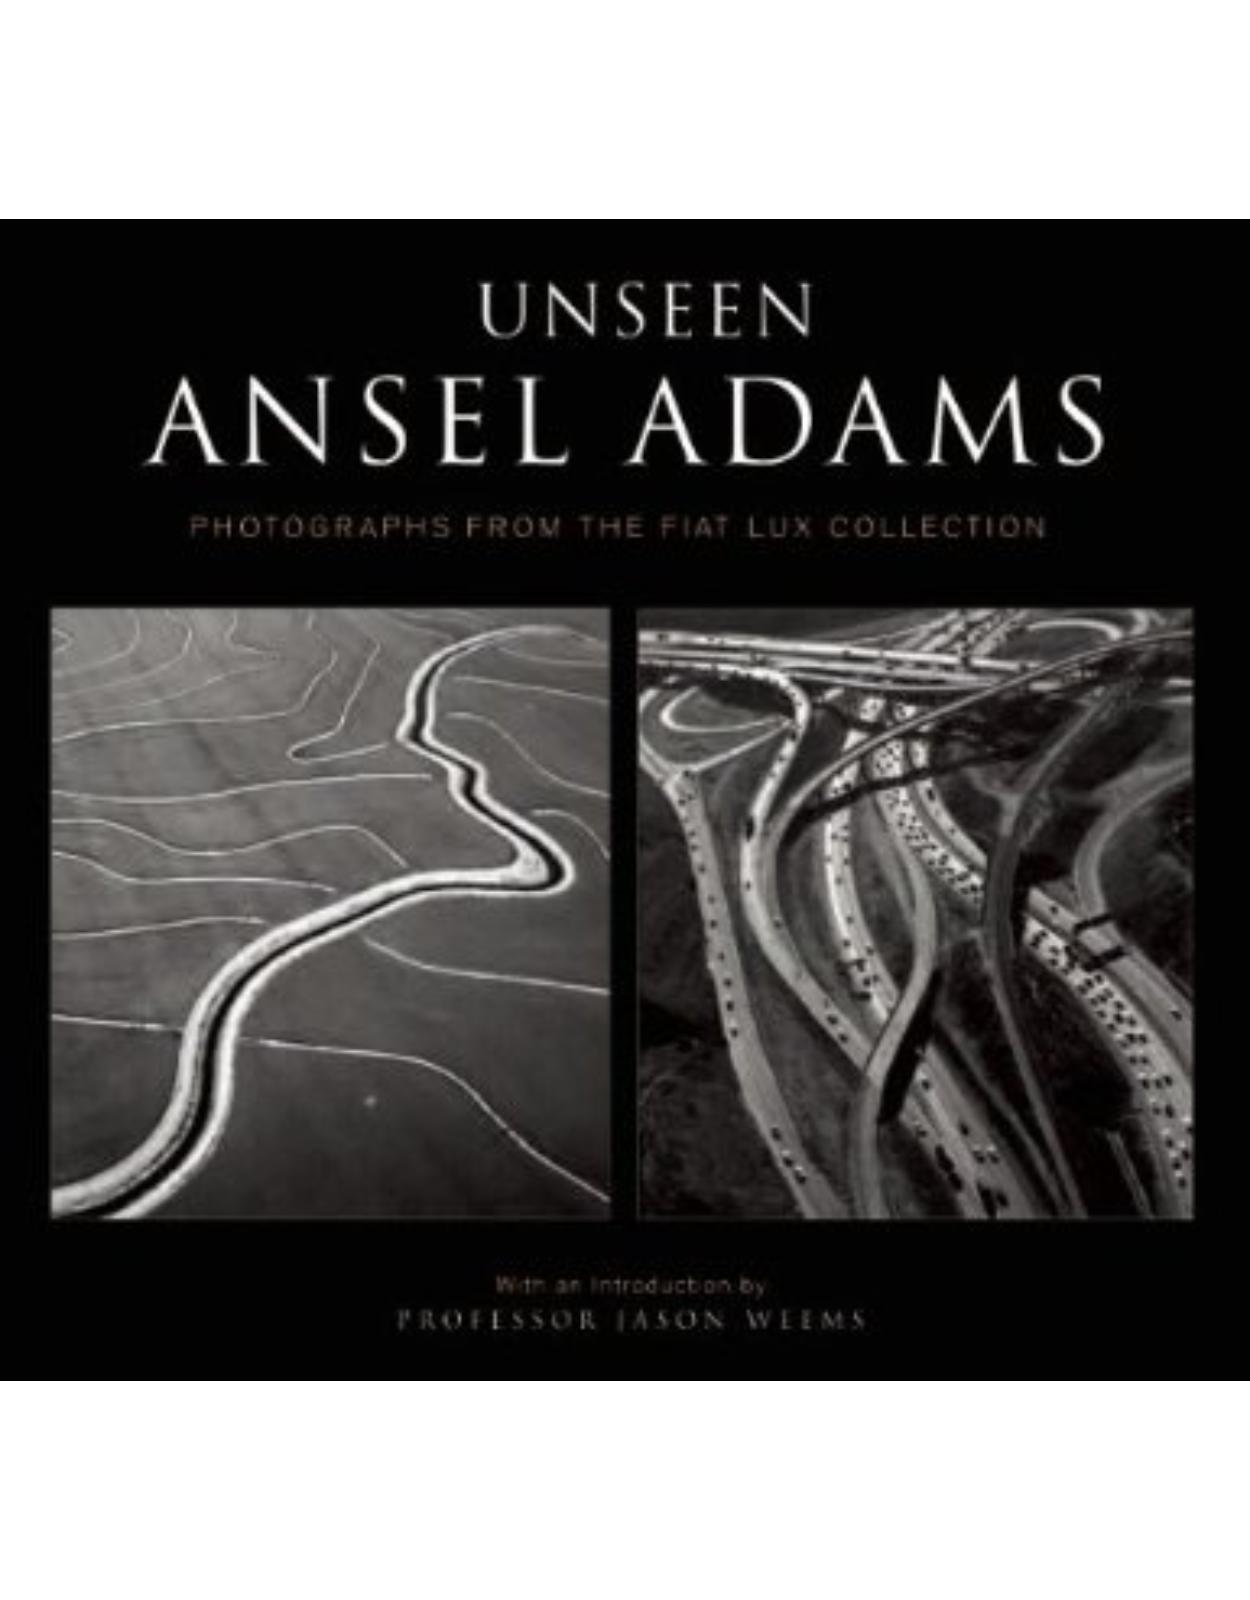 Unseen Ansel Adams: Photographs from the Fiat Lux Collection